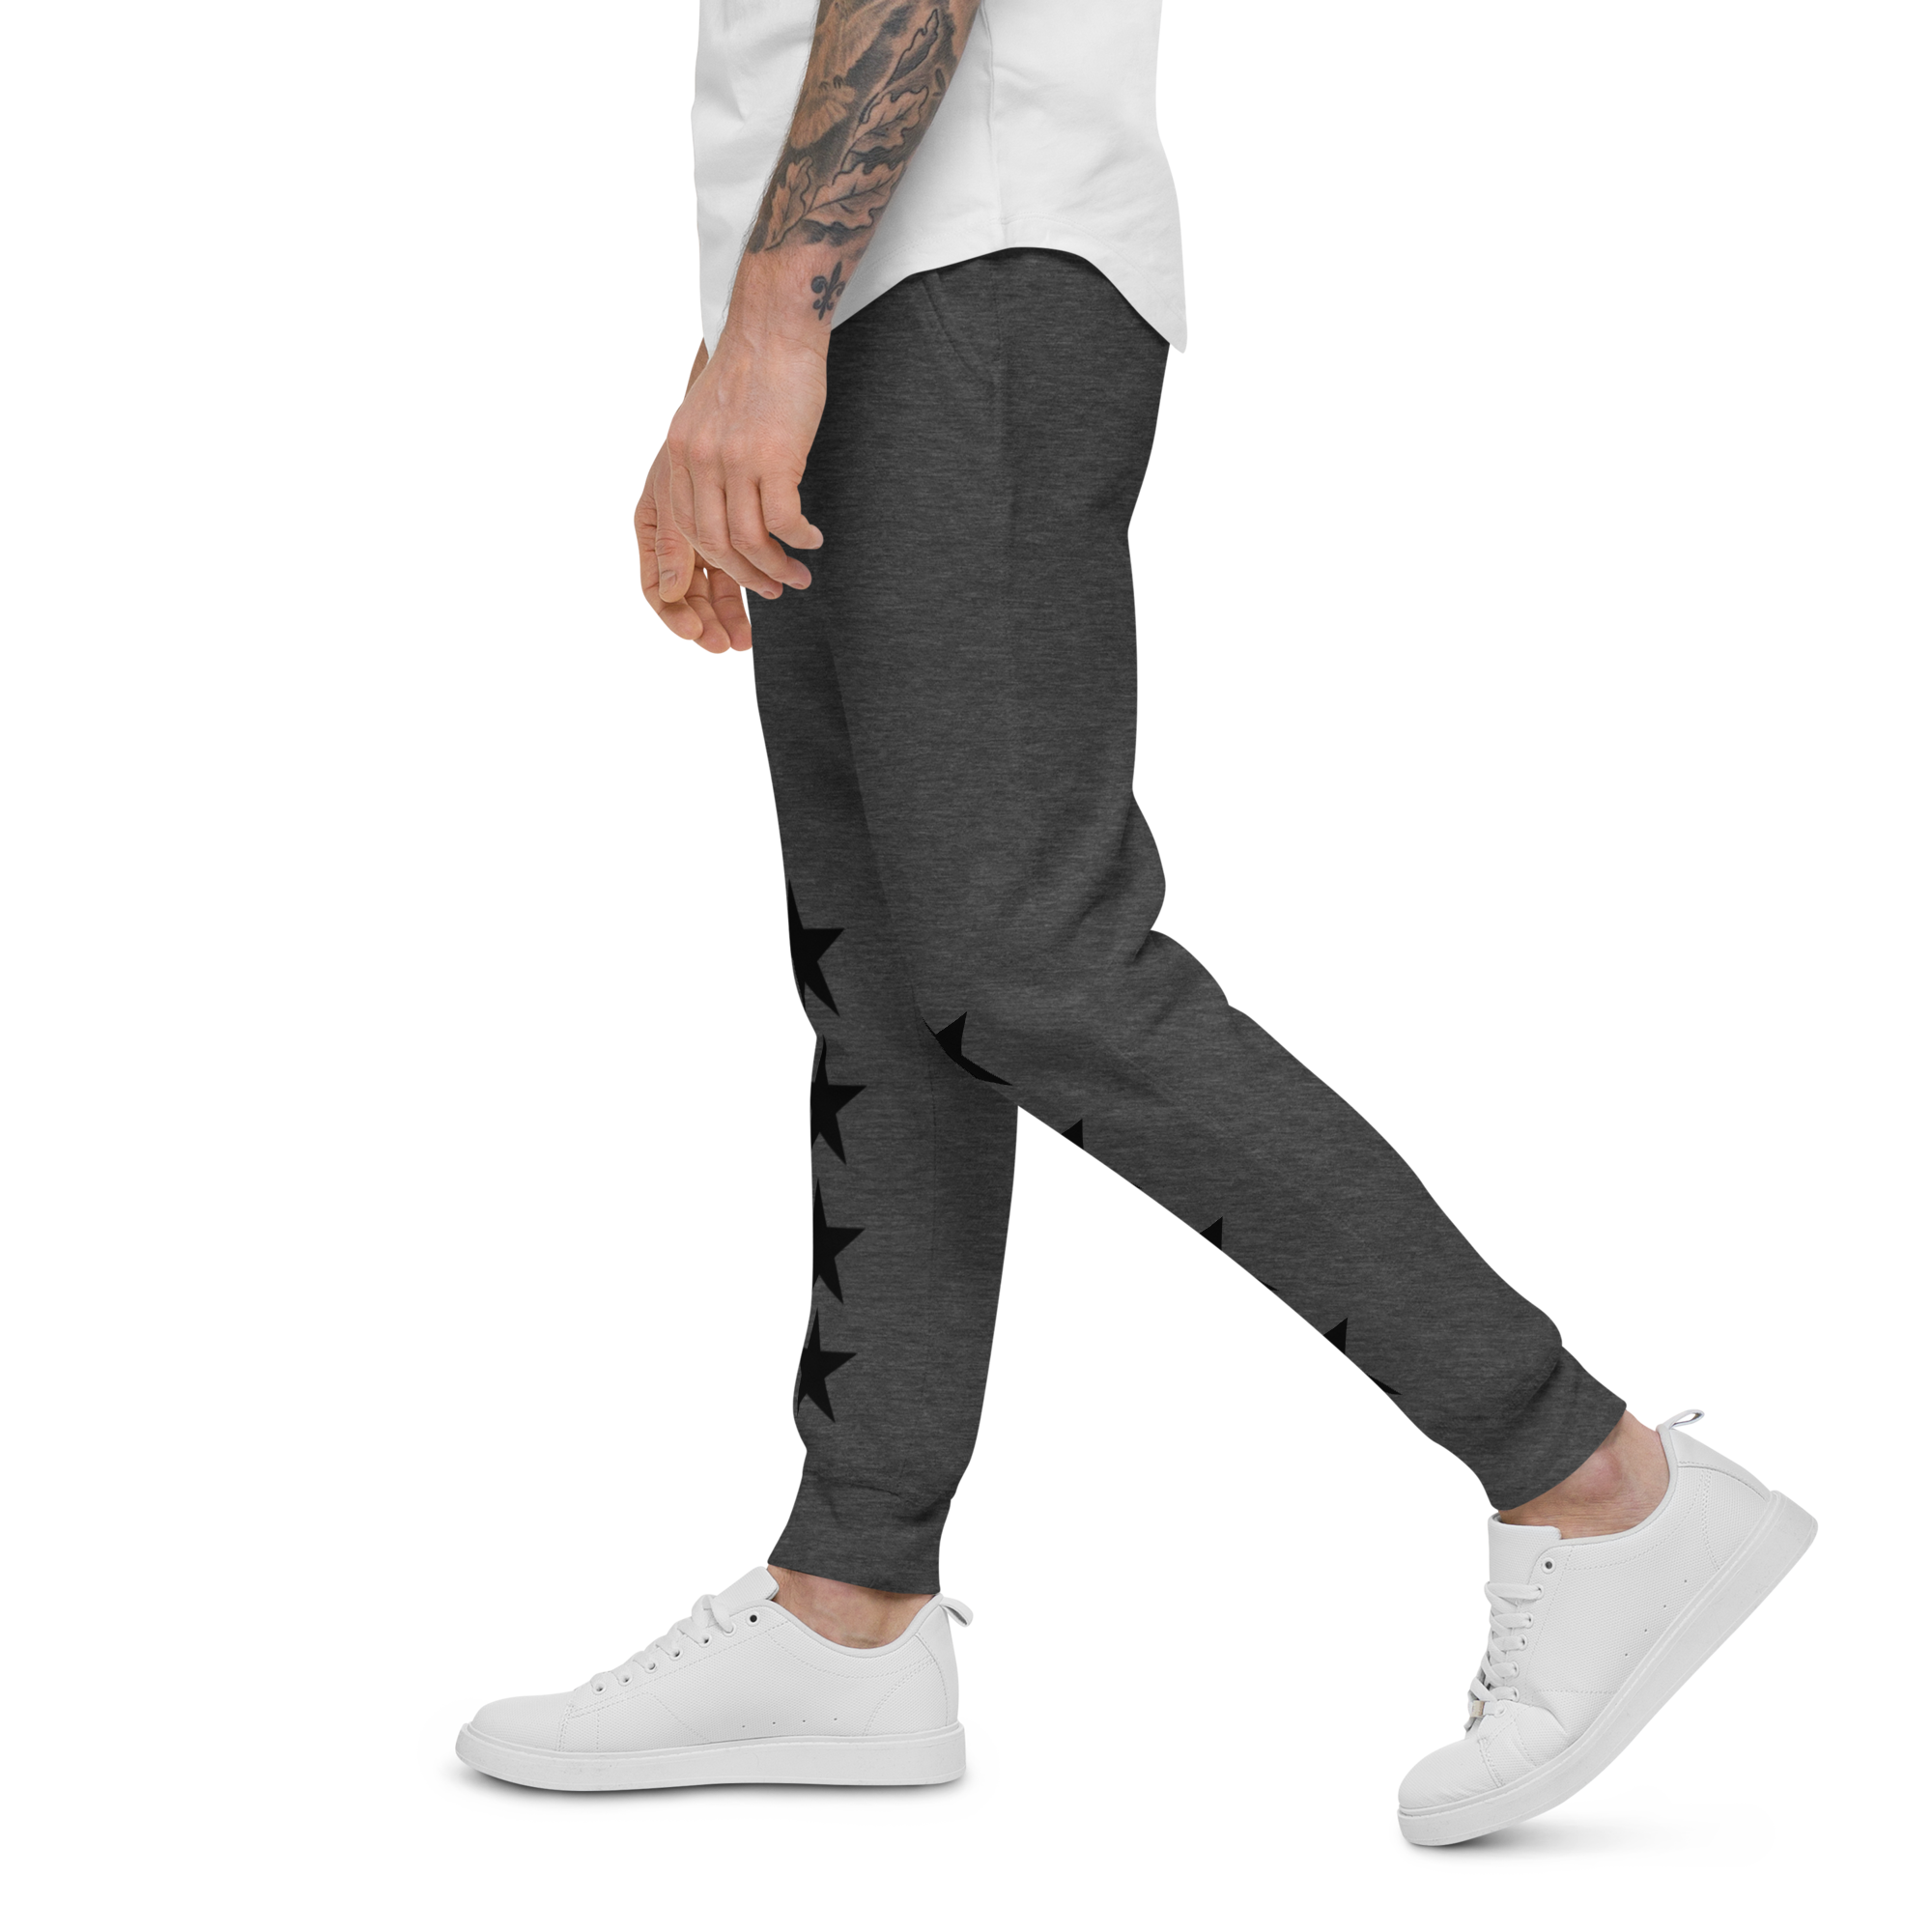 Riches Couture Mens Sweatpants dark heather grey